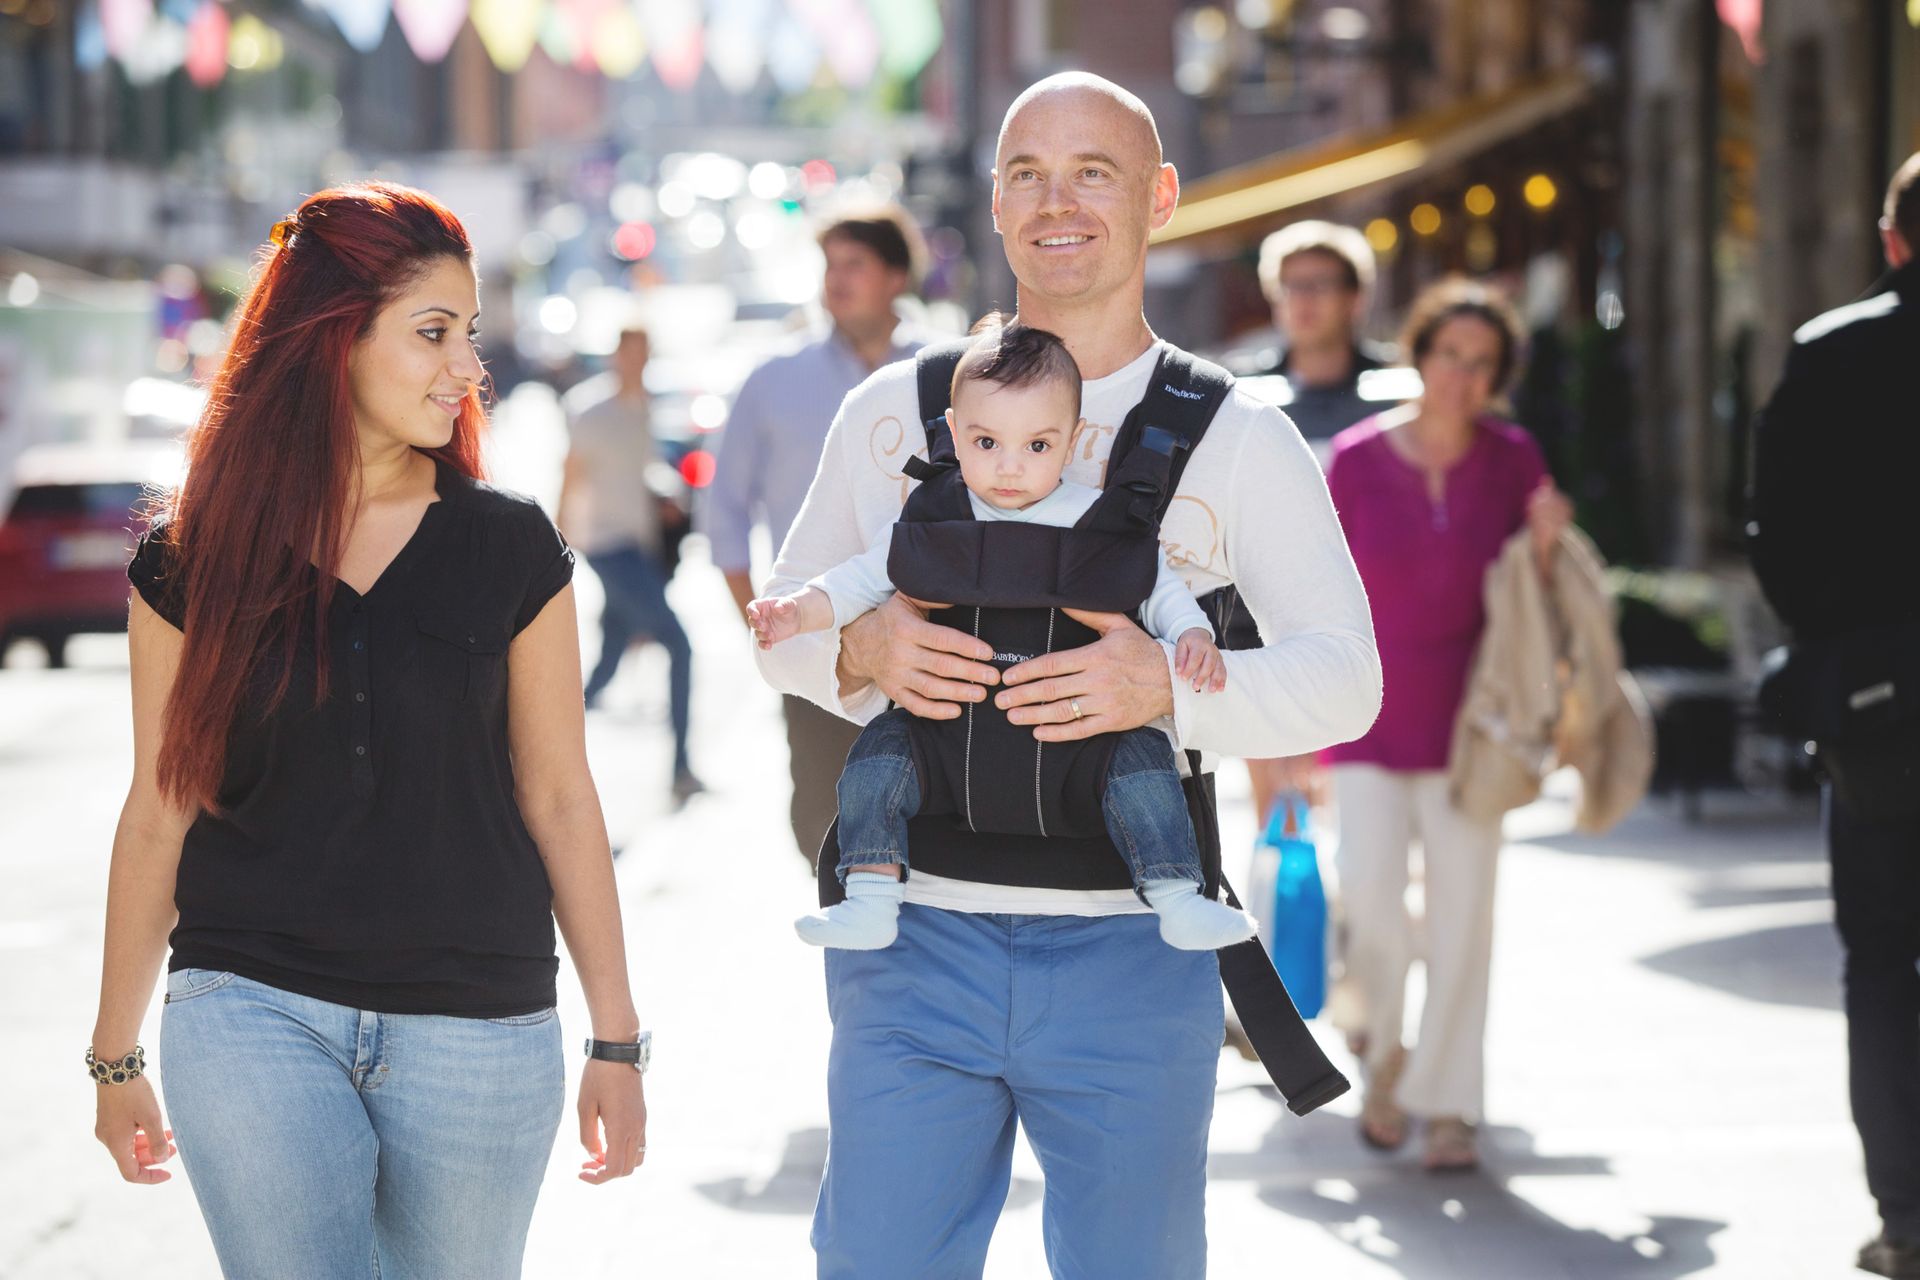 Two people walking down a street. One person is carrying a baby in a baby sling.